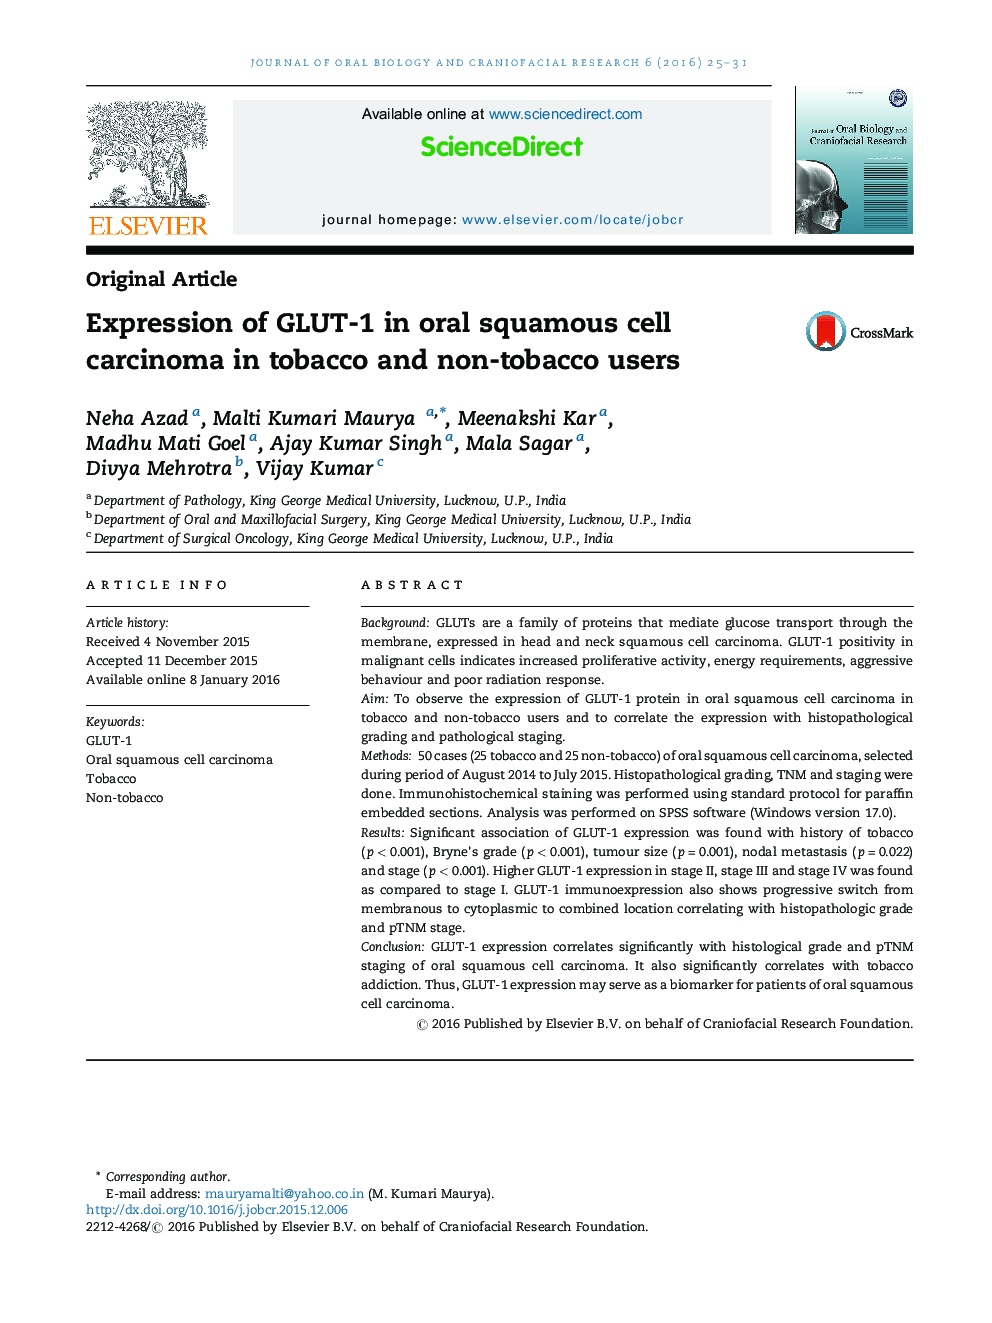 Expression of GLUT-1 in oral squamous cell carcinoma in tobacco and non-tobacco users